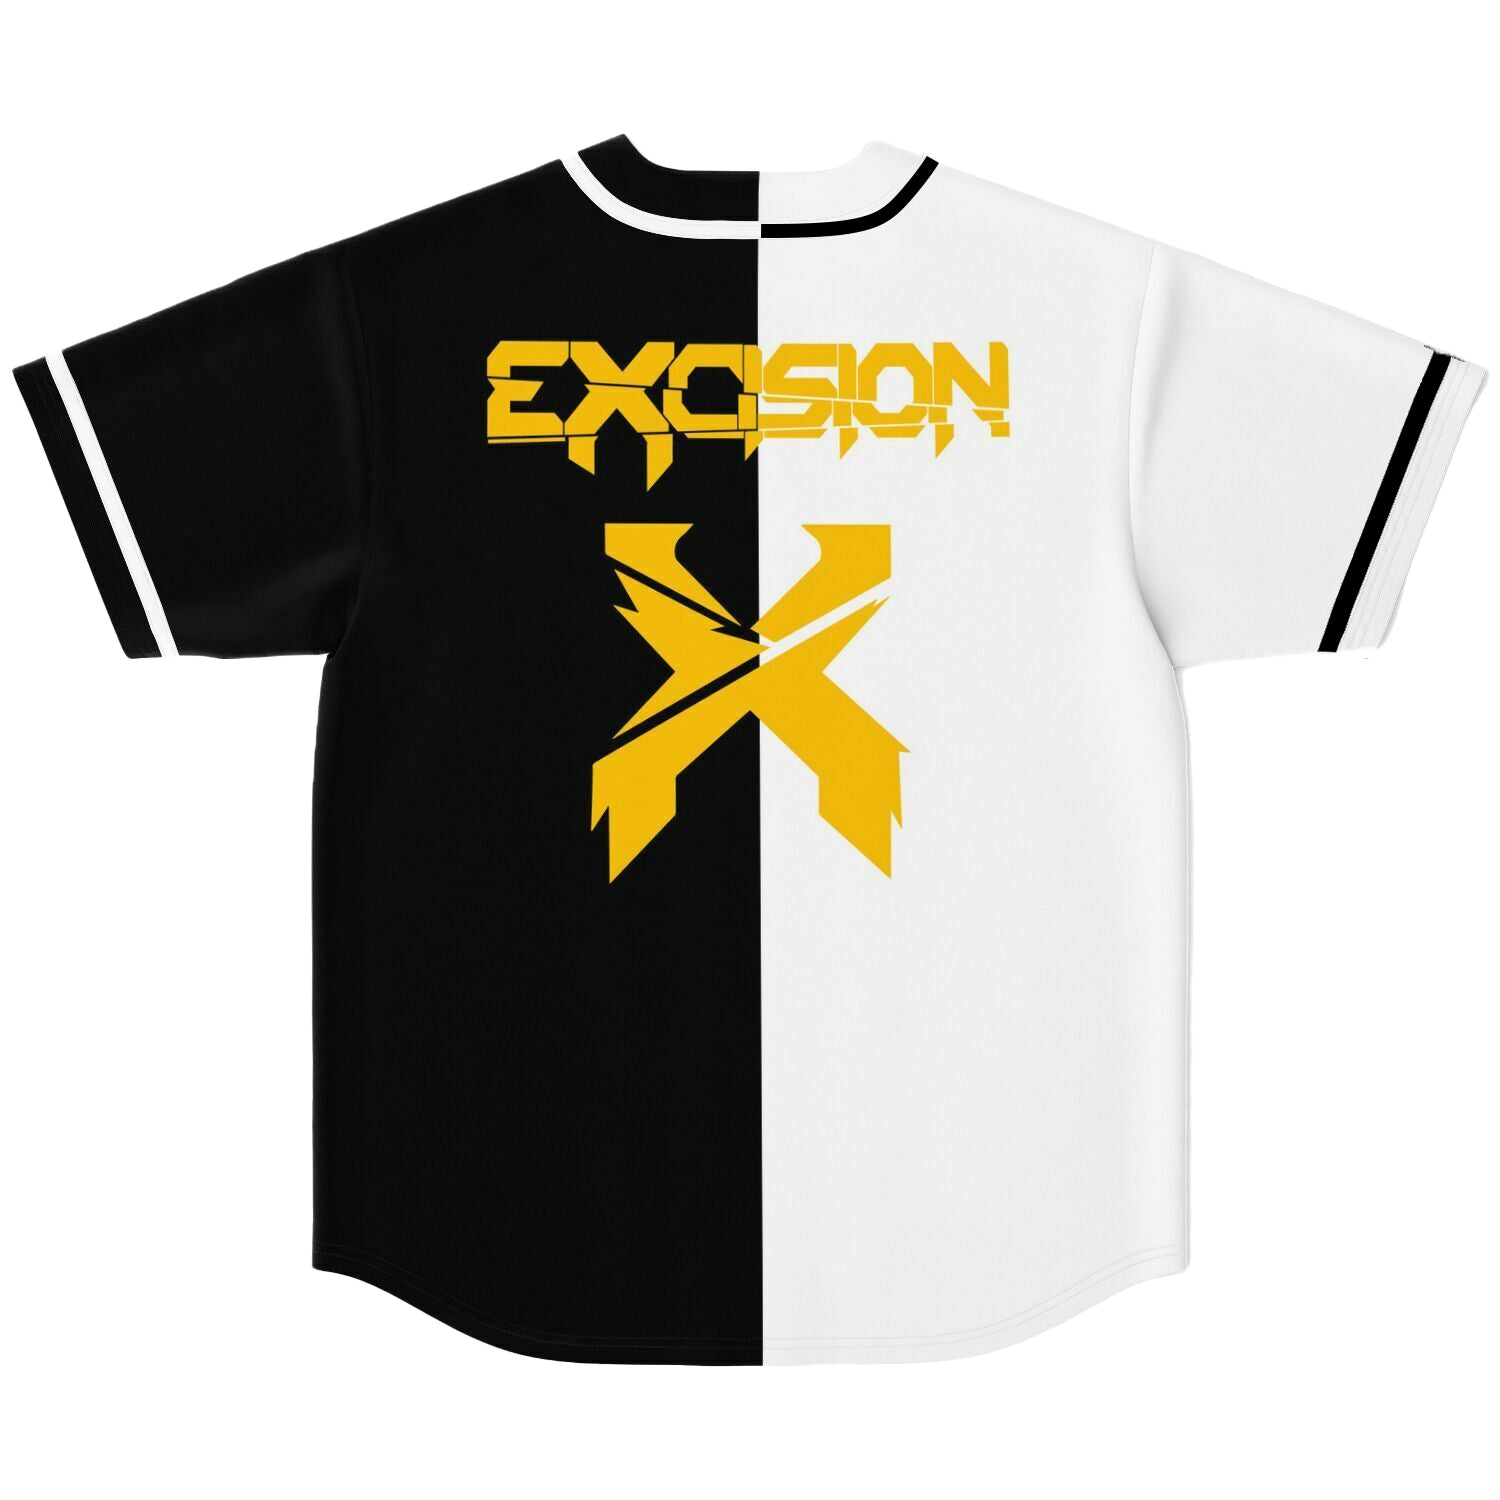 Excision Gold edm jersey